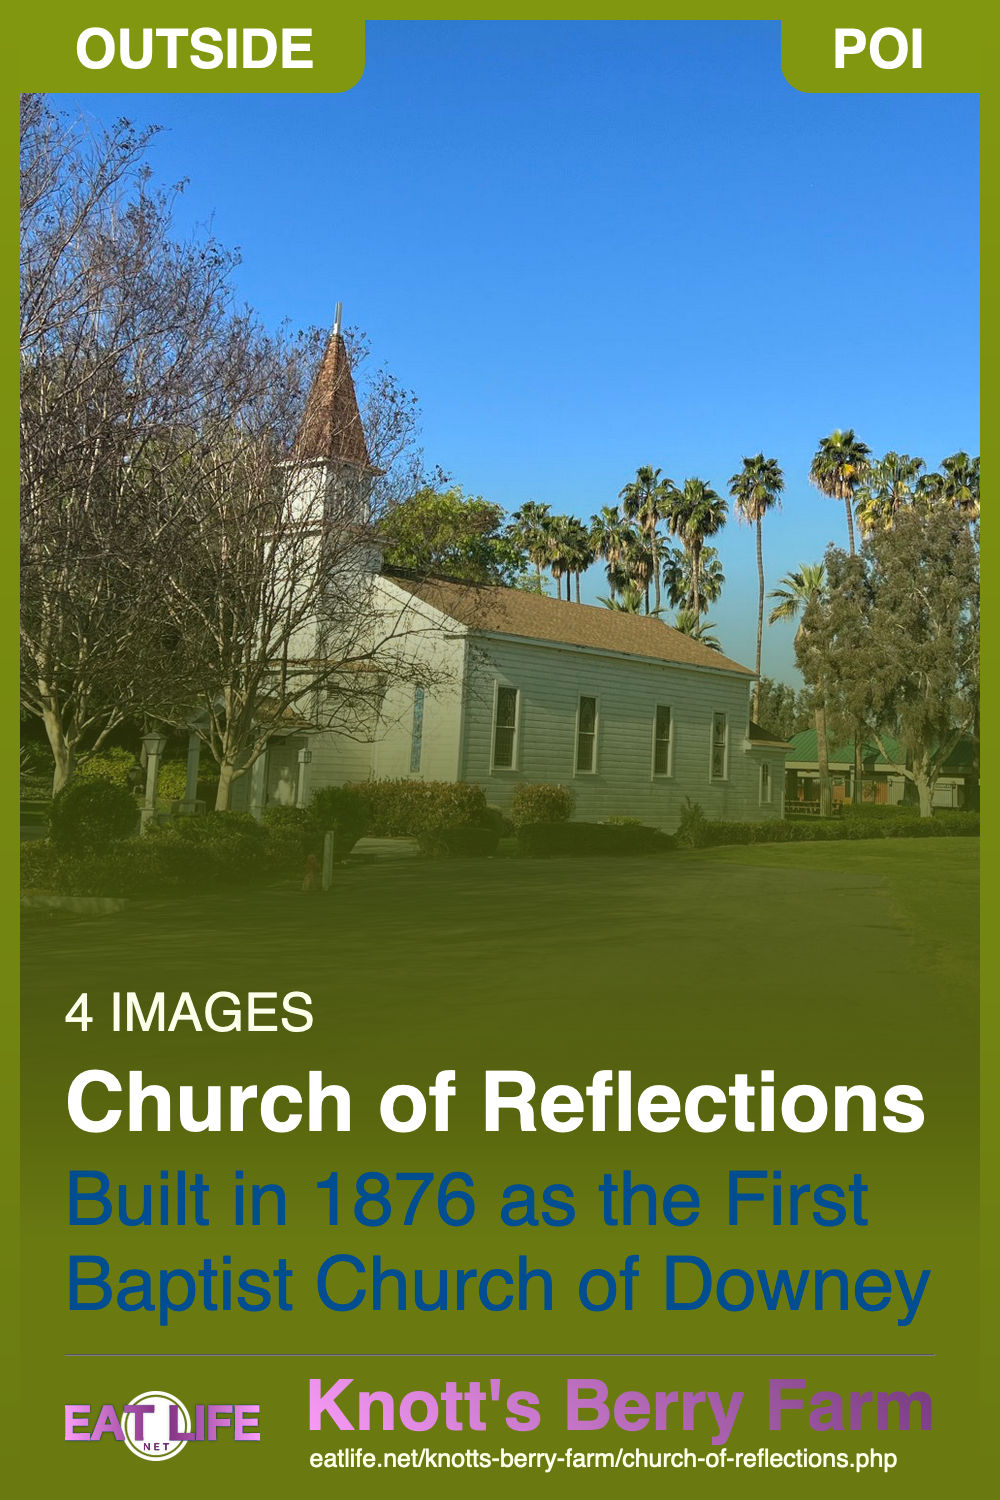 The Church of Reflections